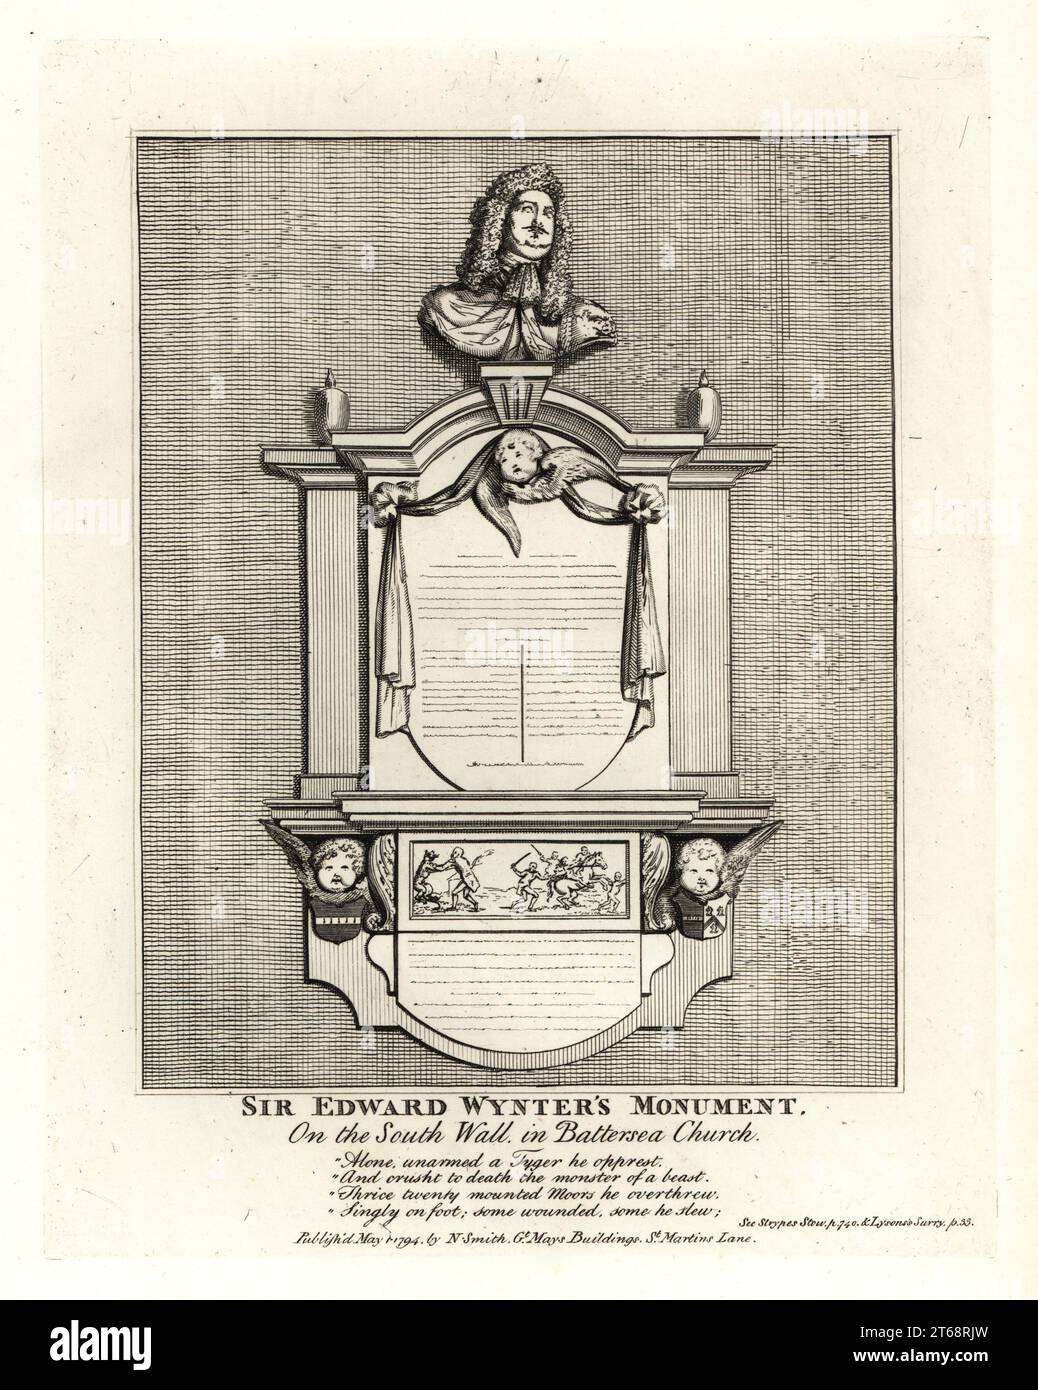 Monument of Sir Edward Wynter, died 1685, on the south wall of St Marys Church Battersea. With bust, cherubs, drapes and depictions of him fighting a tiger and Moors. Copperplate engraving by John Thomas Smith after original drawings by members of the Society of Antiquaries from his J.T. Smiths Antiquities of London and its Environs, J. Sewell, R. Folder, J. Simco, London, 1794. Stock Photo